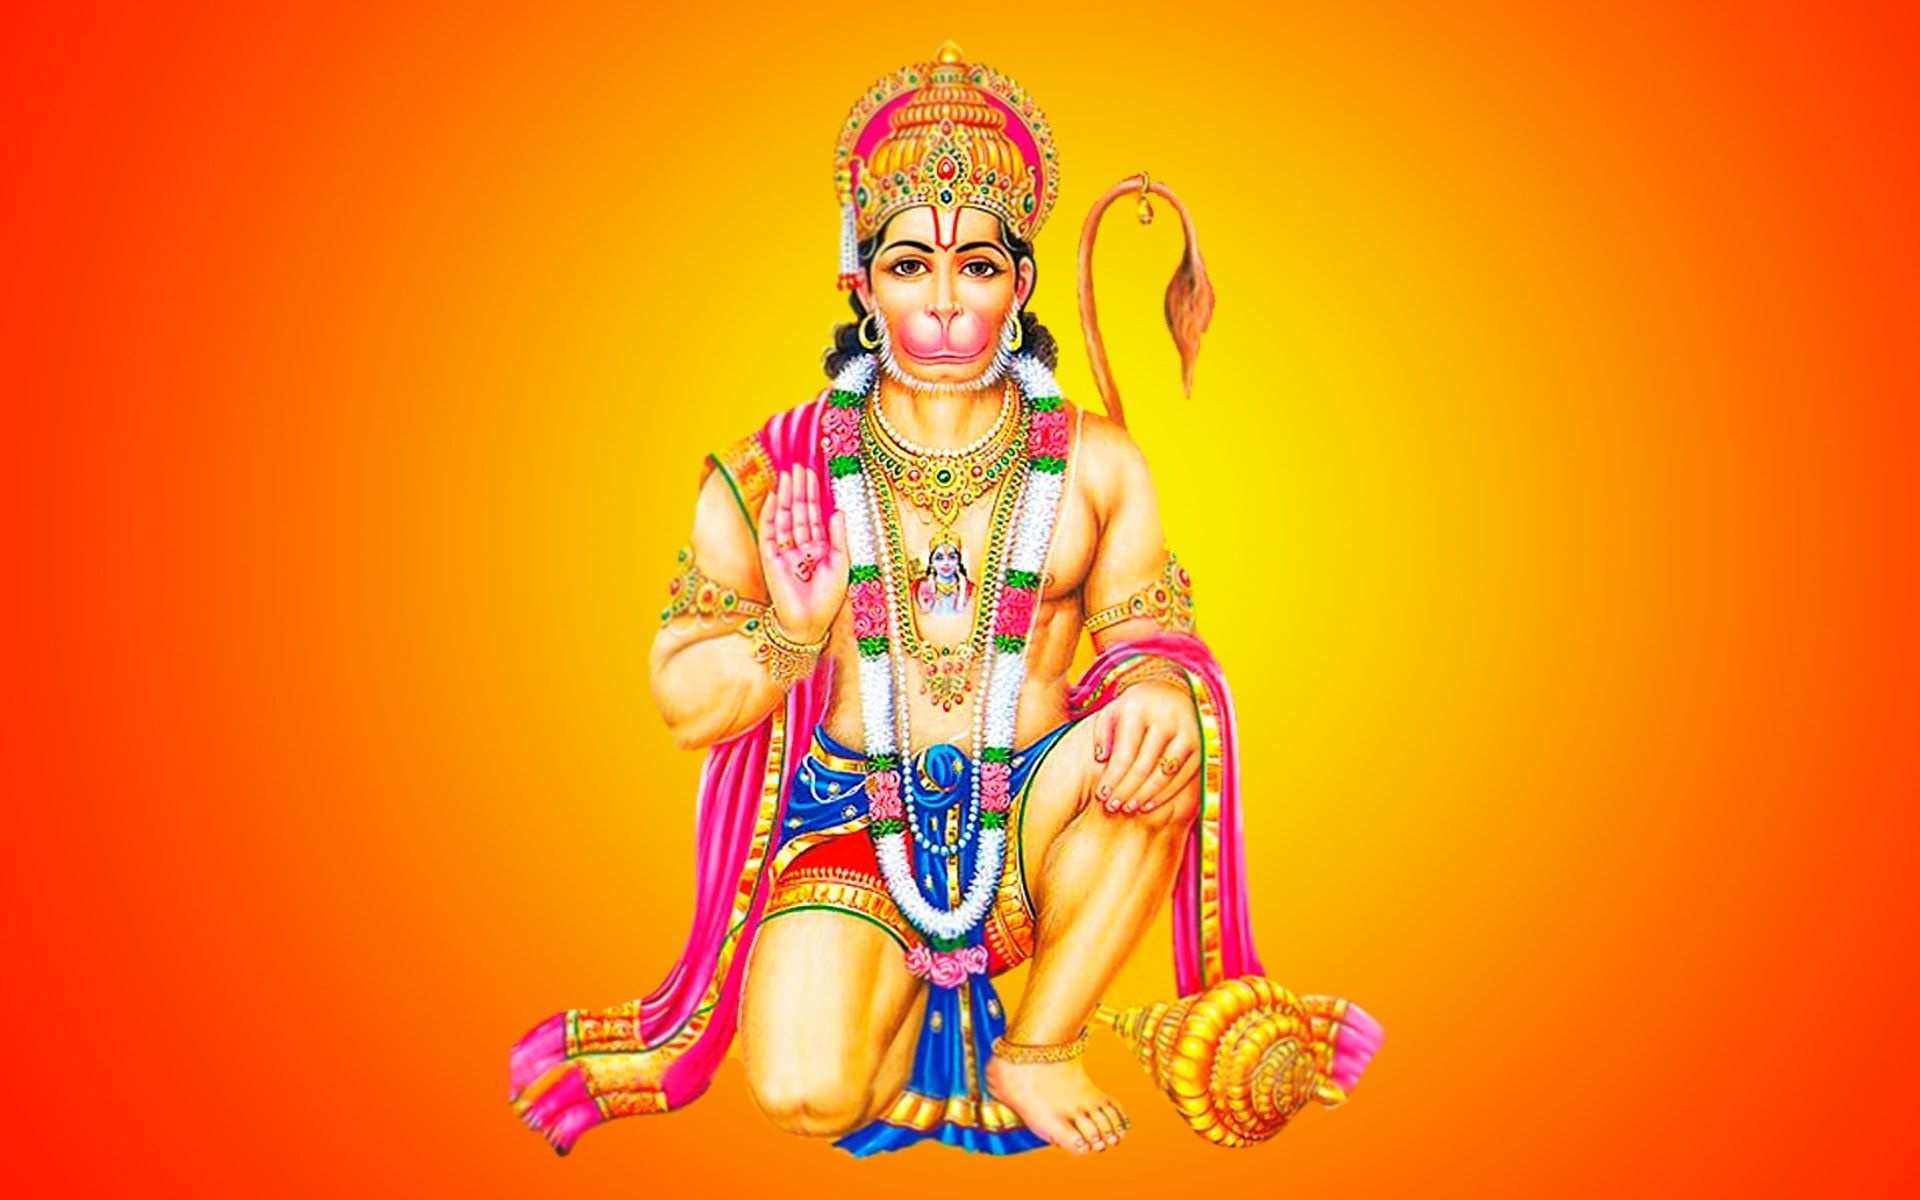 Lord Hanuman Images Lord Hanuman Wallpapers God Hanuman Photos Lord Hanuman Hd Wallpaper Wallpapers in ultra hd 4k 3840x2160, 8k 7680x4320 and 1920x1080 high definition resolutions. lord hanuman images lord hanuman